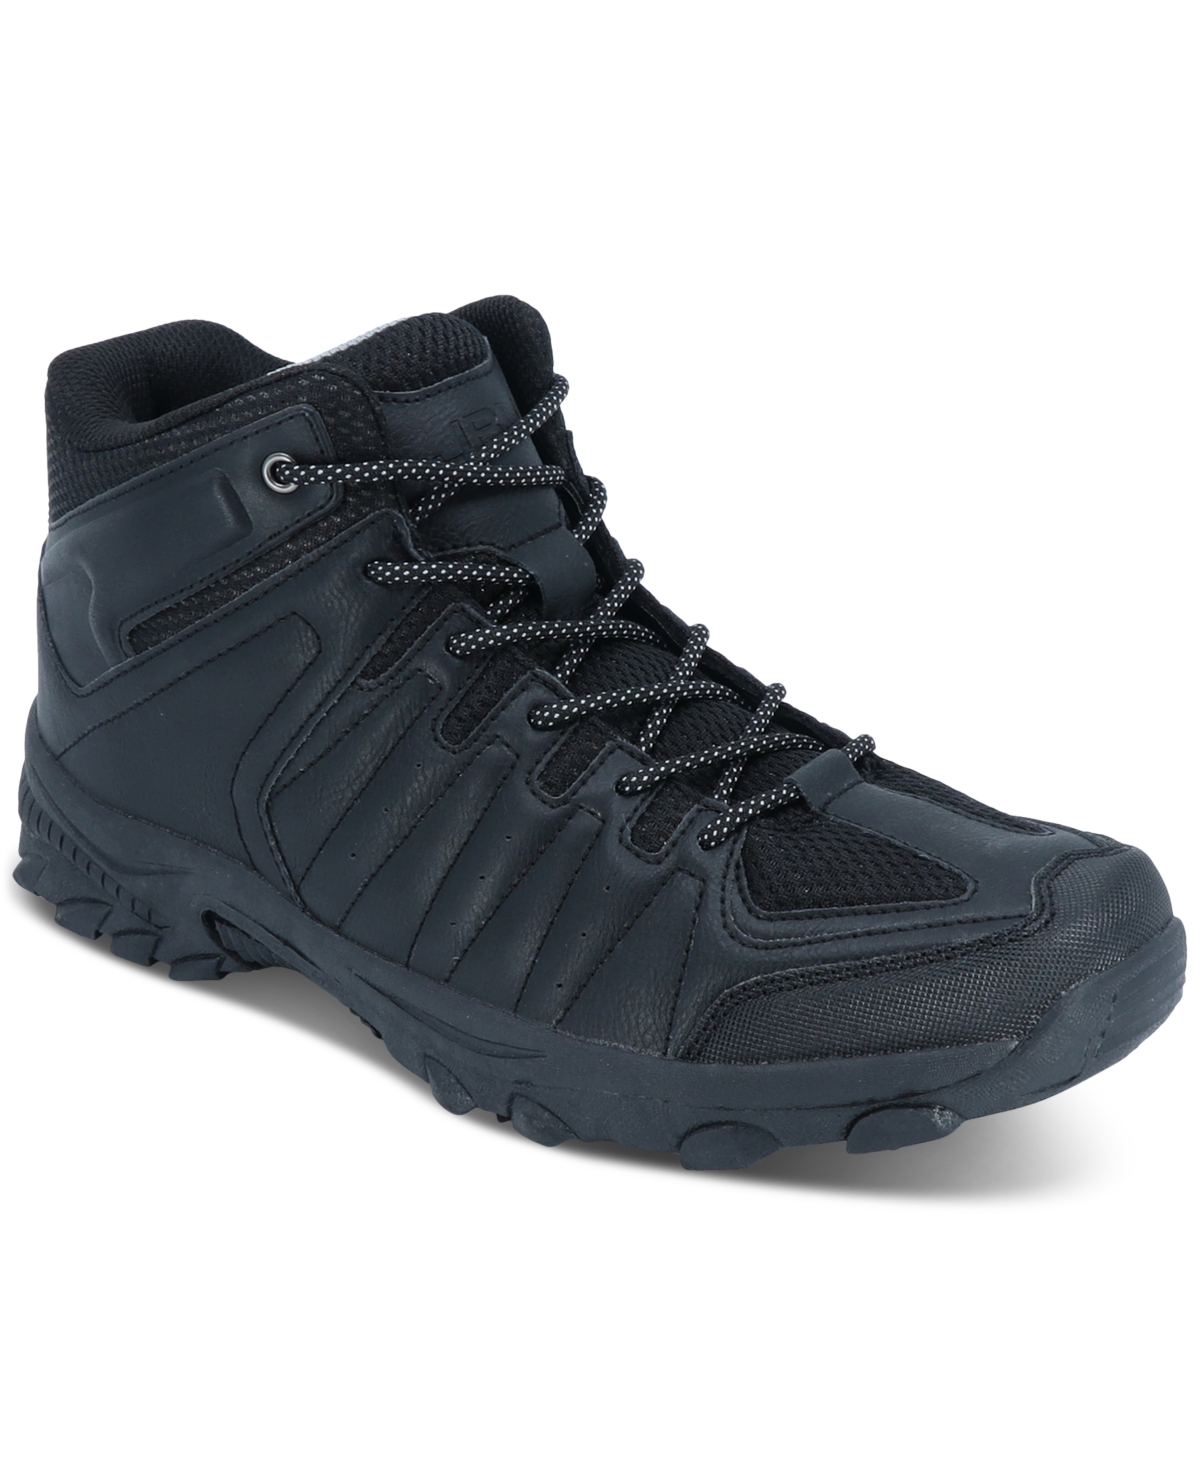 Men's Torrence Lace-Up Slip & Water-Resistant Hiking Boots - Black/grey